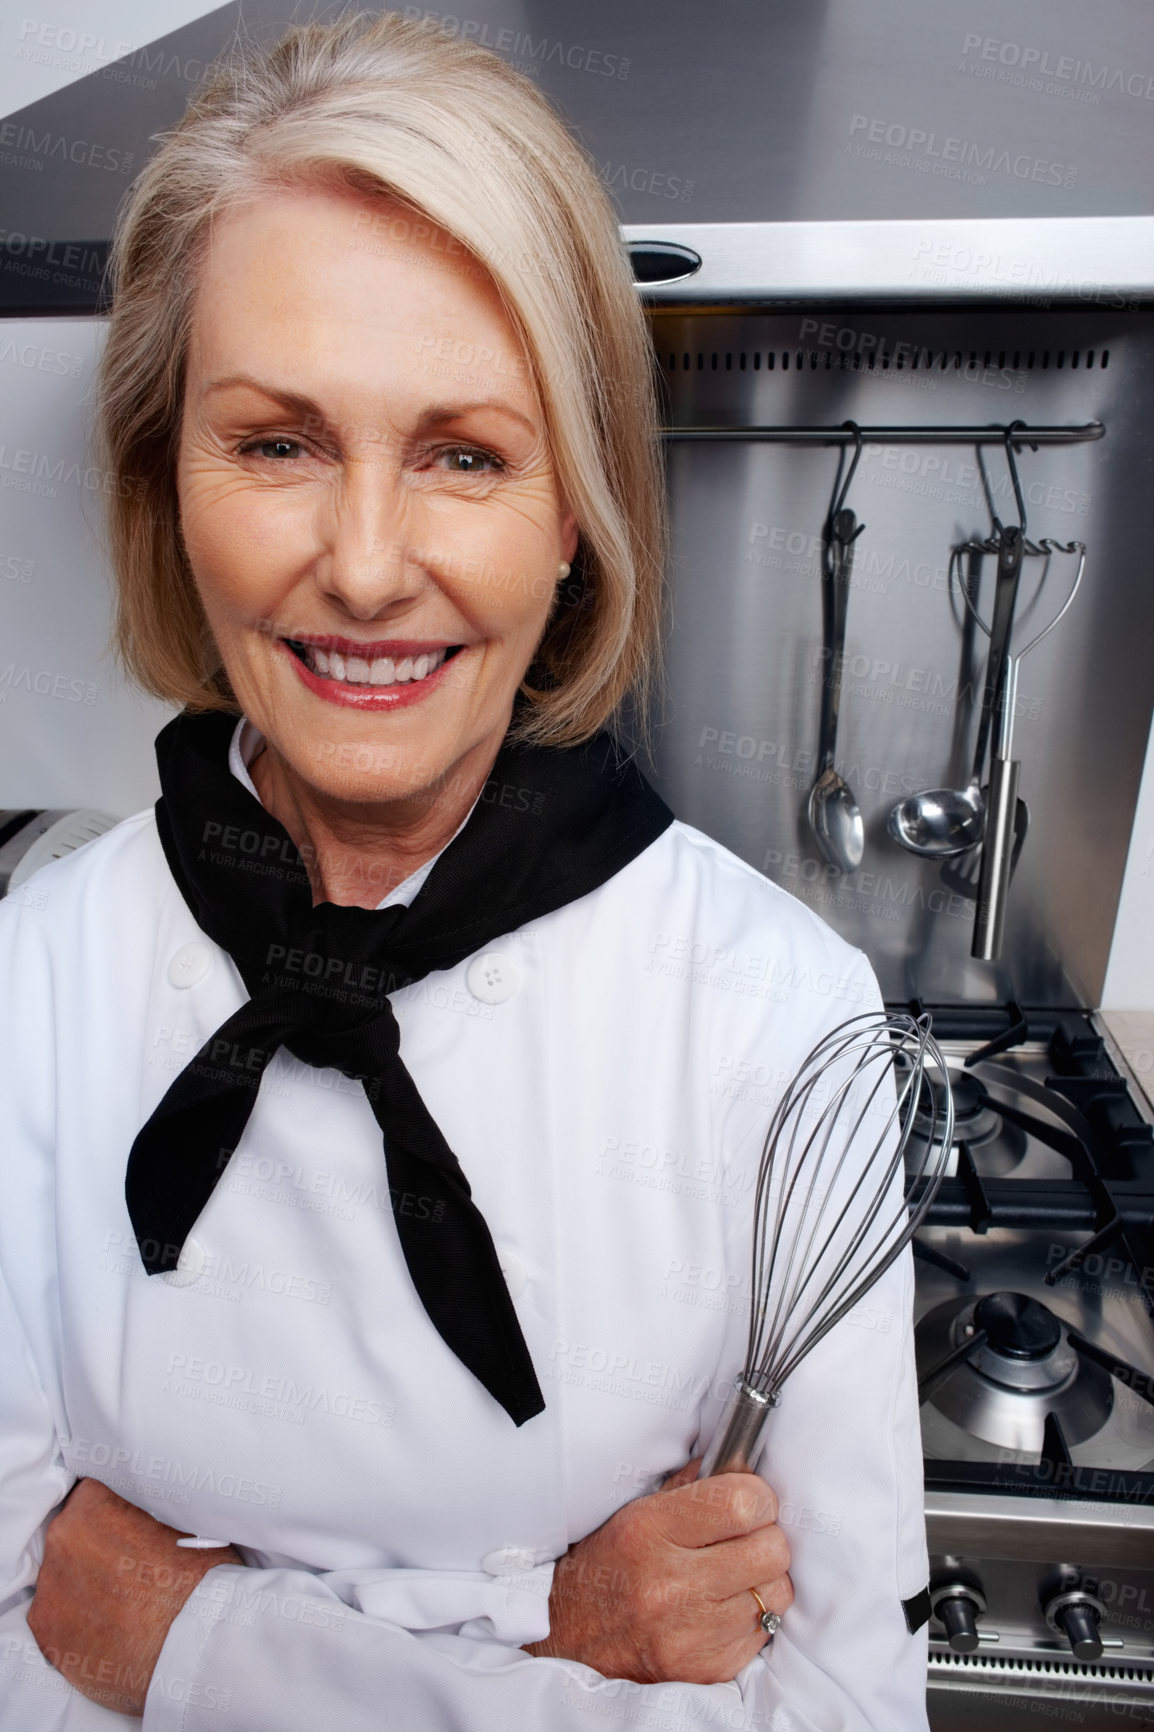 Buy stock photo Closeup portrait of a female chef holding wire whisk standing in front of gas stove